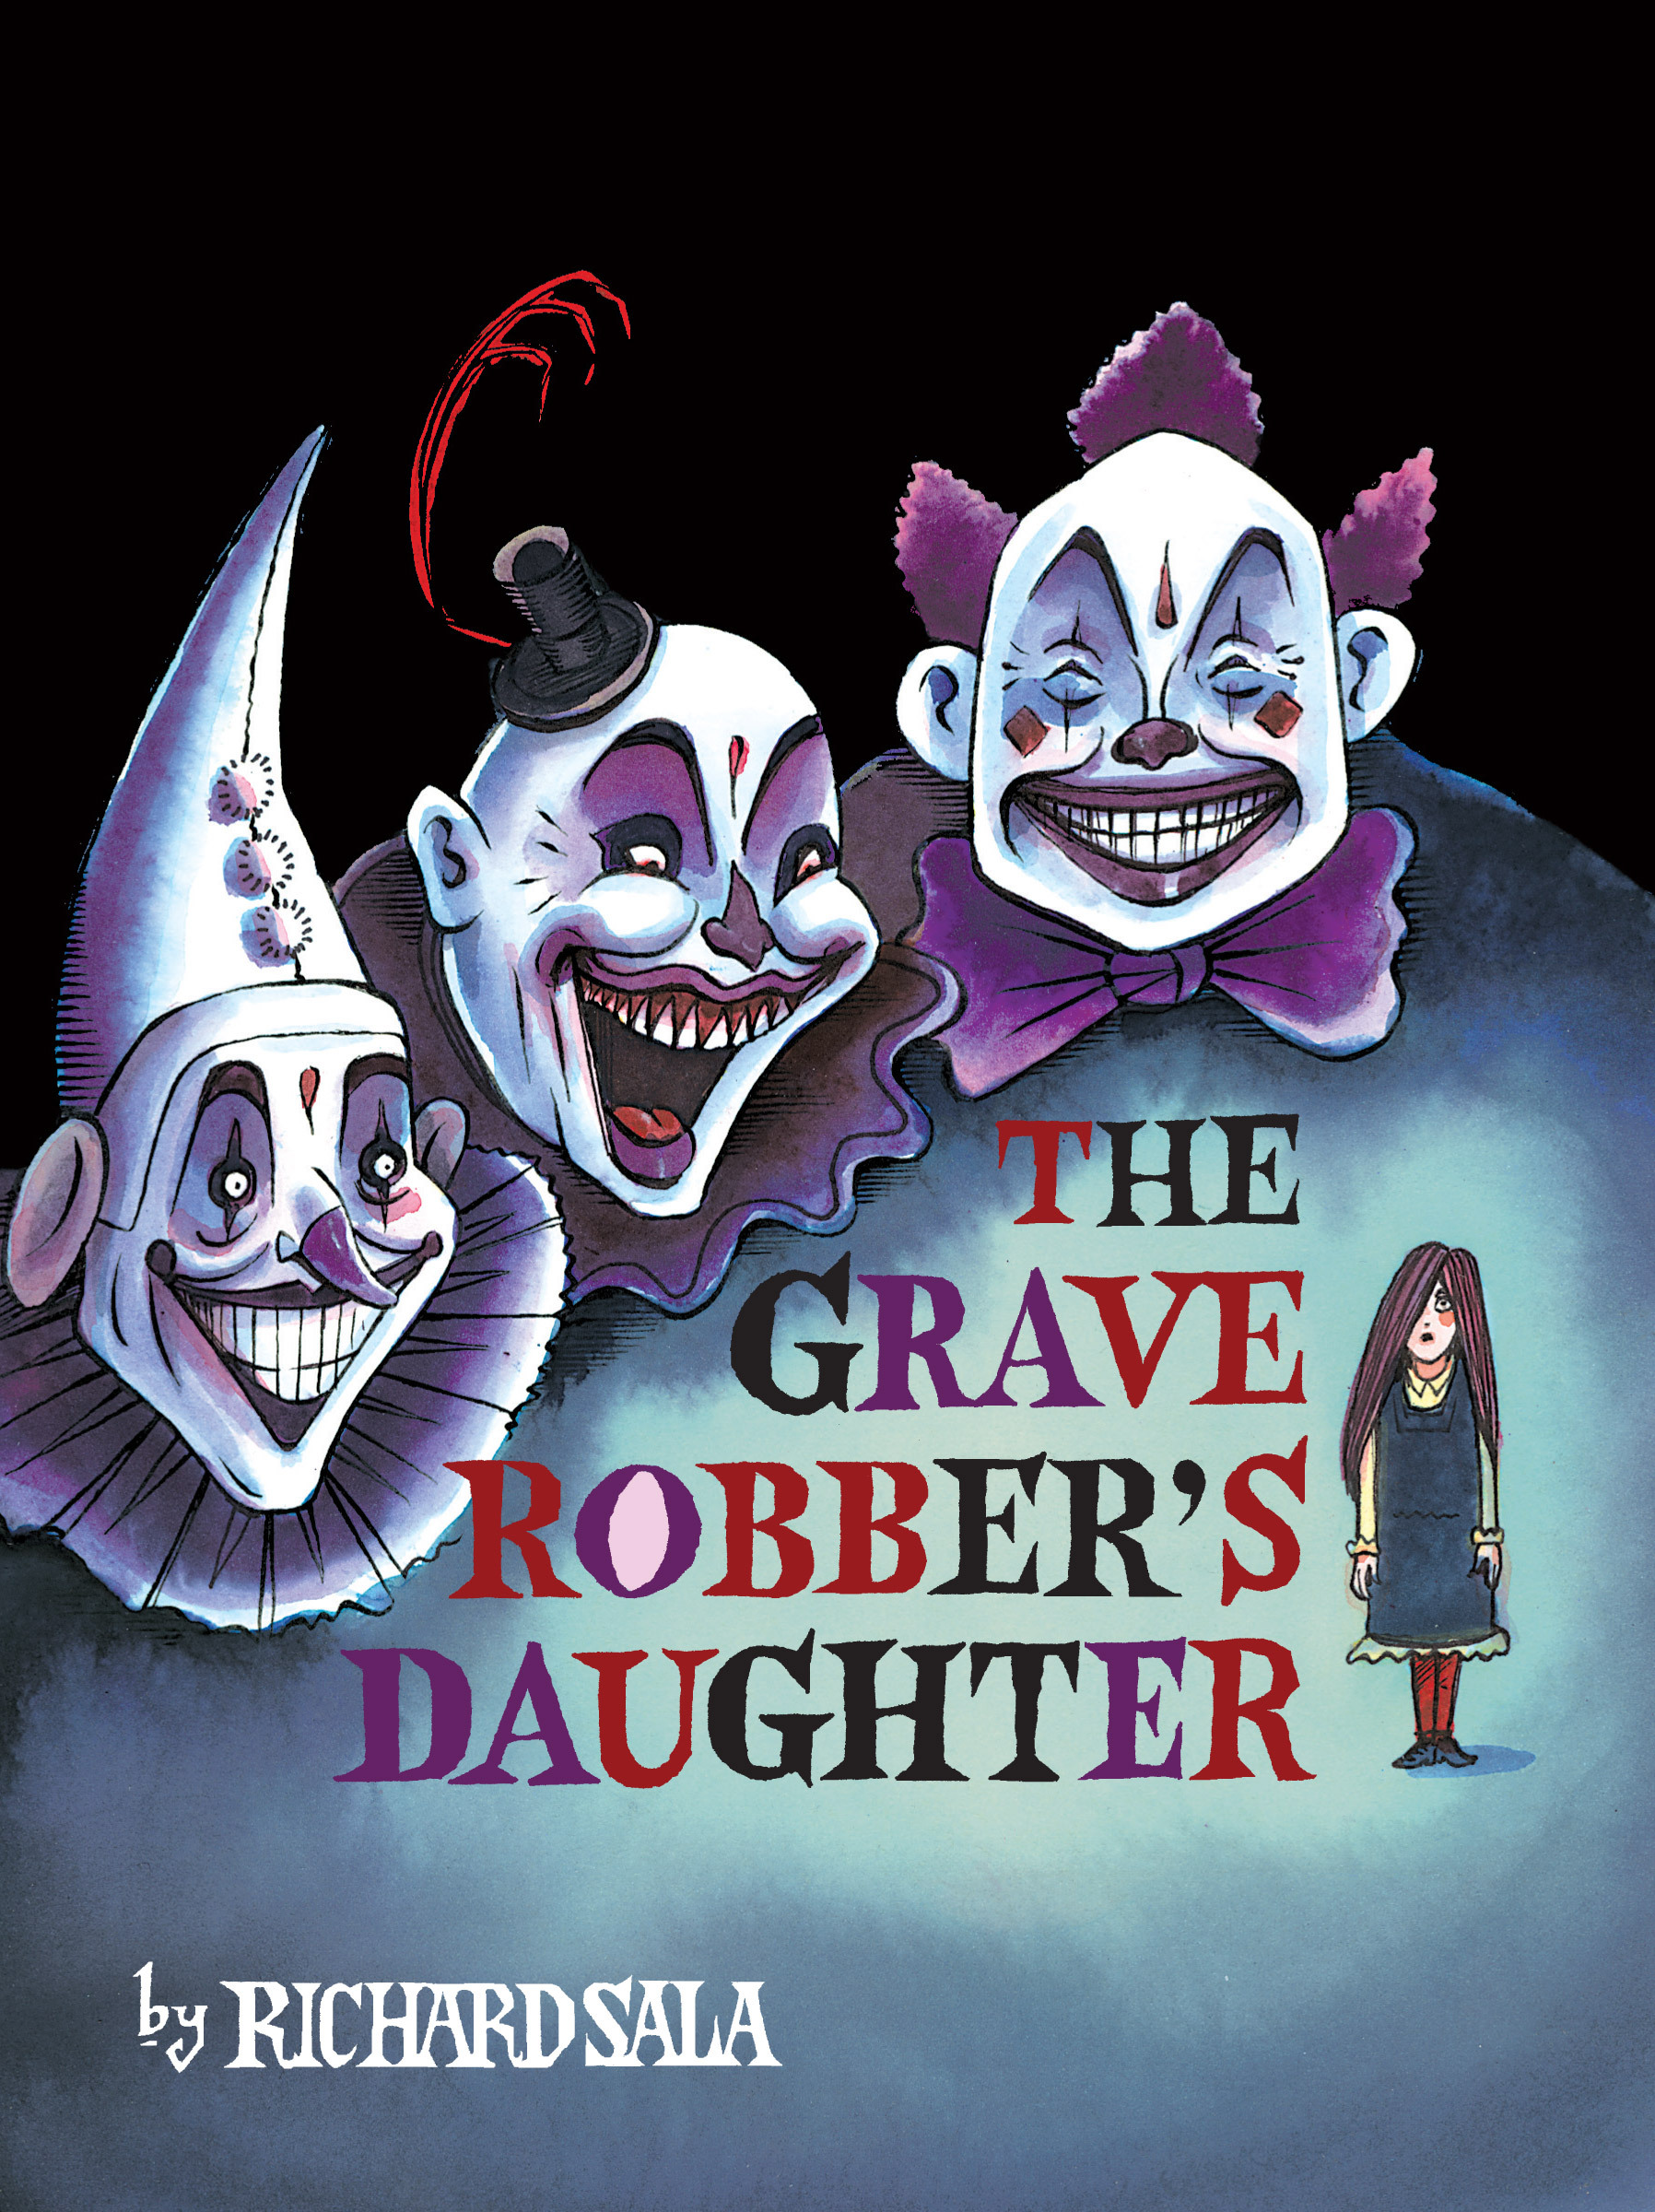 Read online Grave Robber's Daughter comic -  Issue # TPB - 1